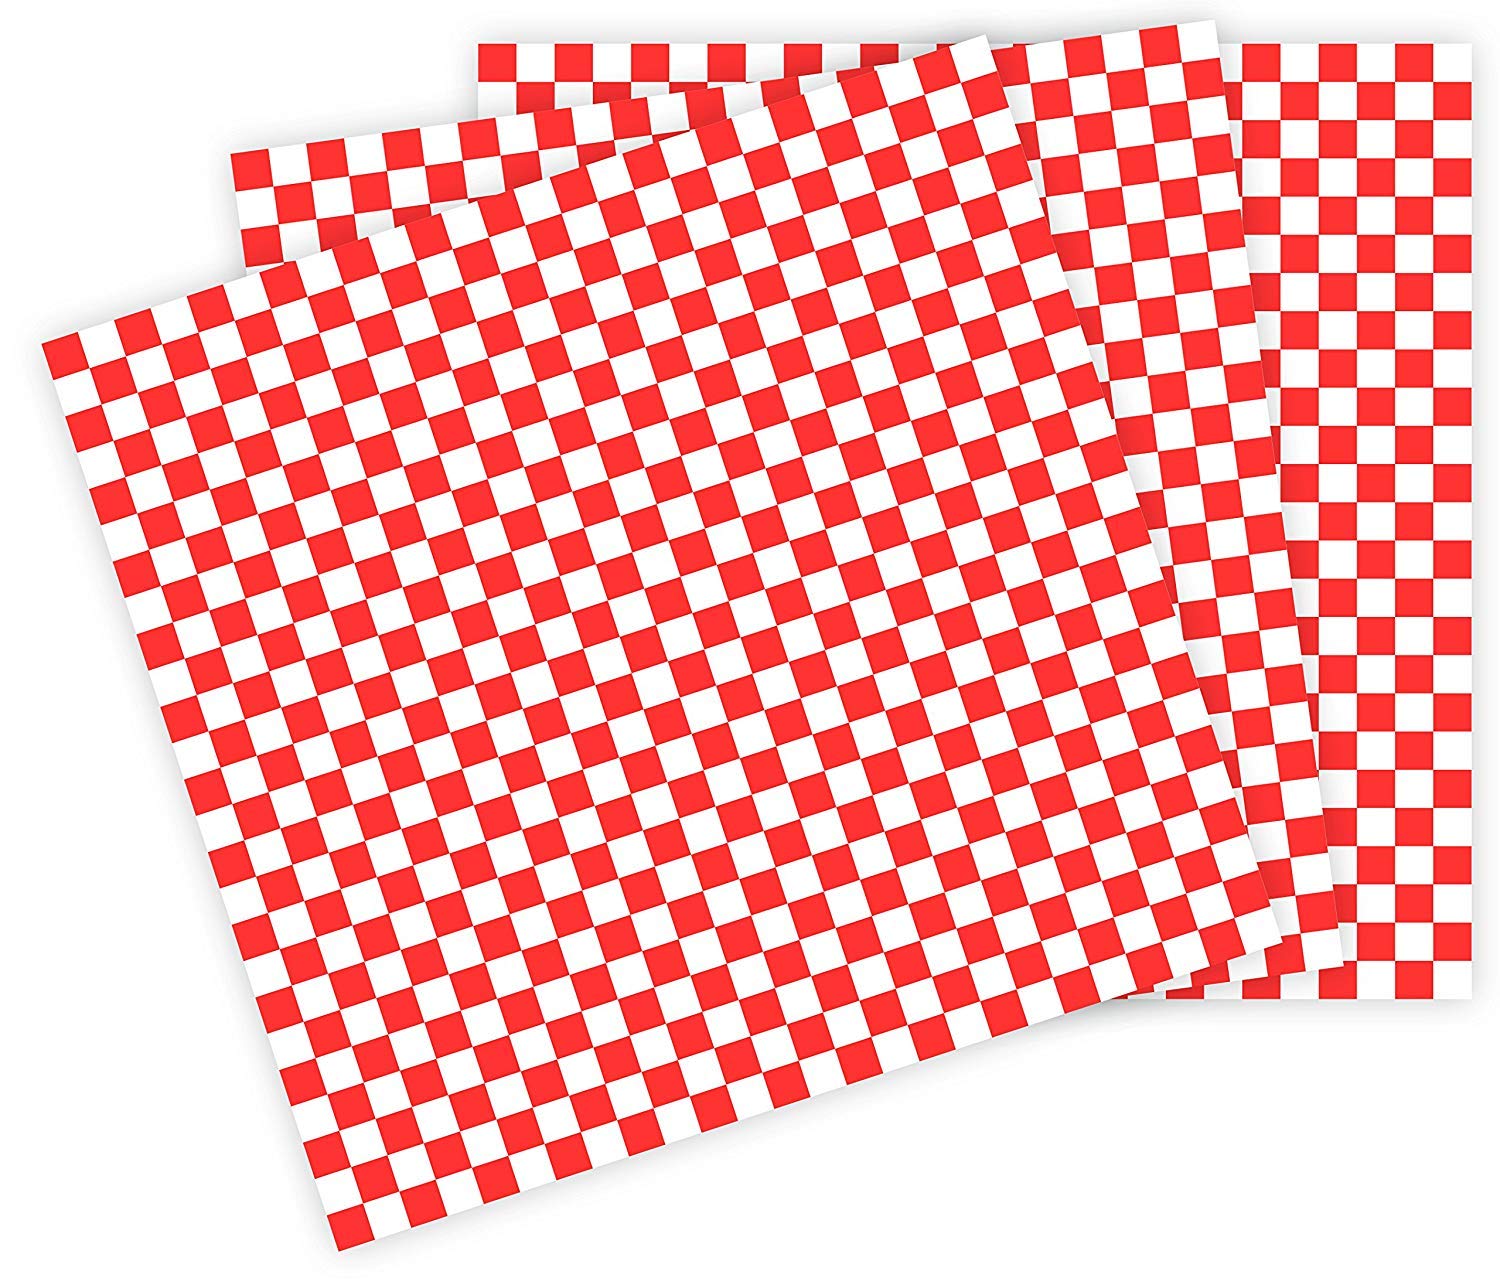 Basket Liner, Greaseproof, Red Checkered, 12'' x 12'' - 1000 Sheets